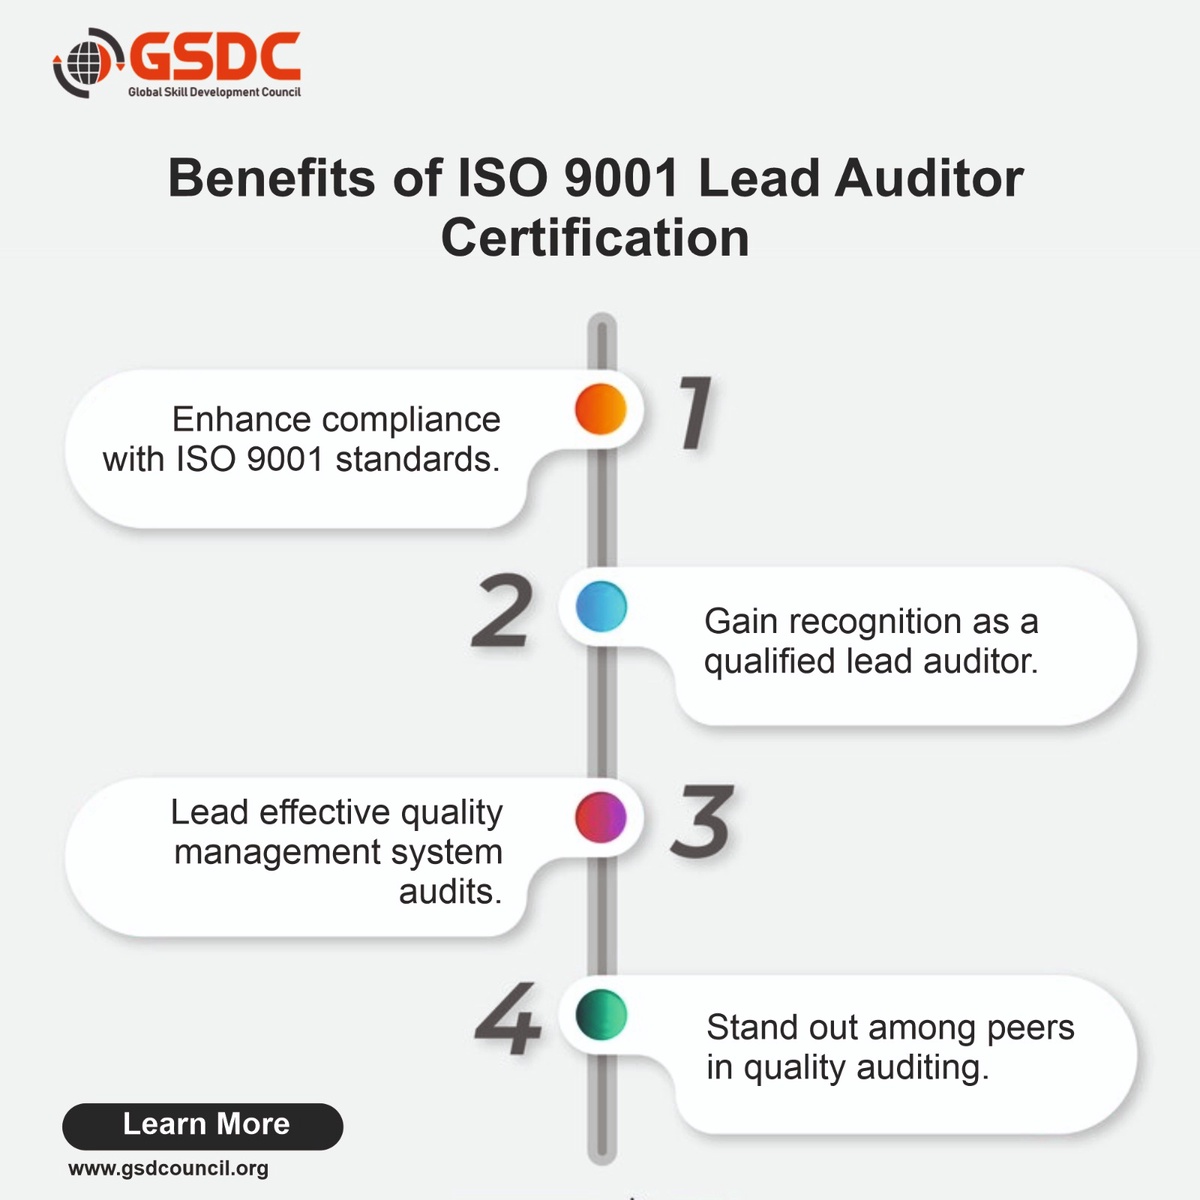 Benefits of ISO 9001 Lead Auditor Certification